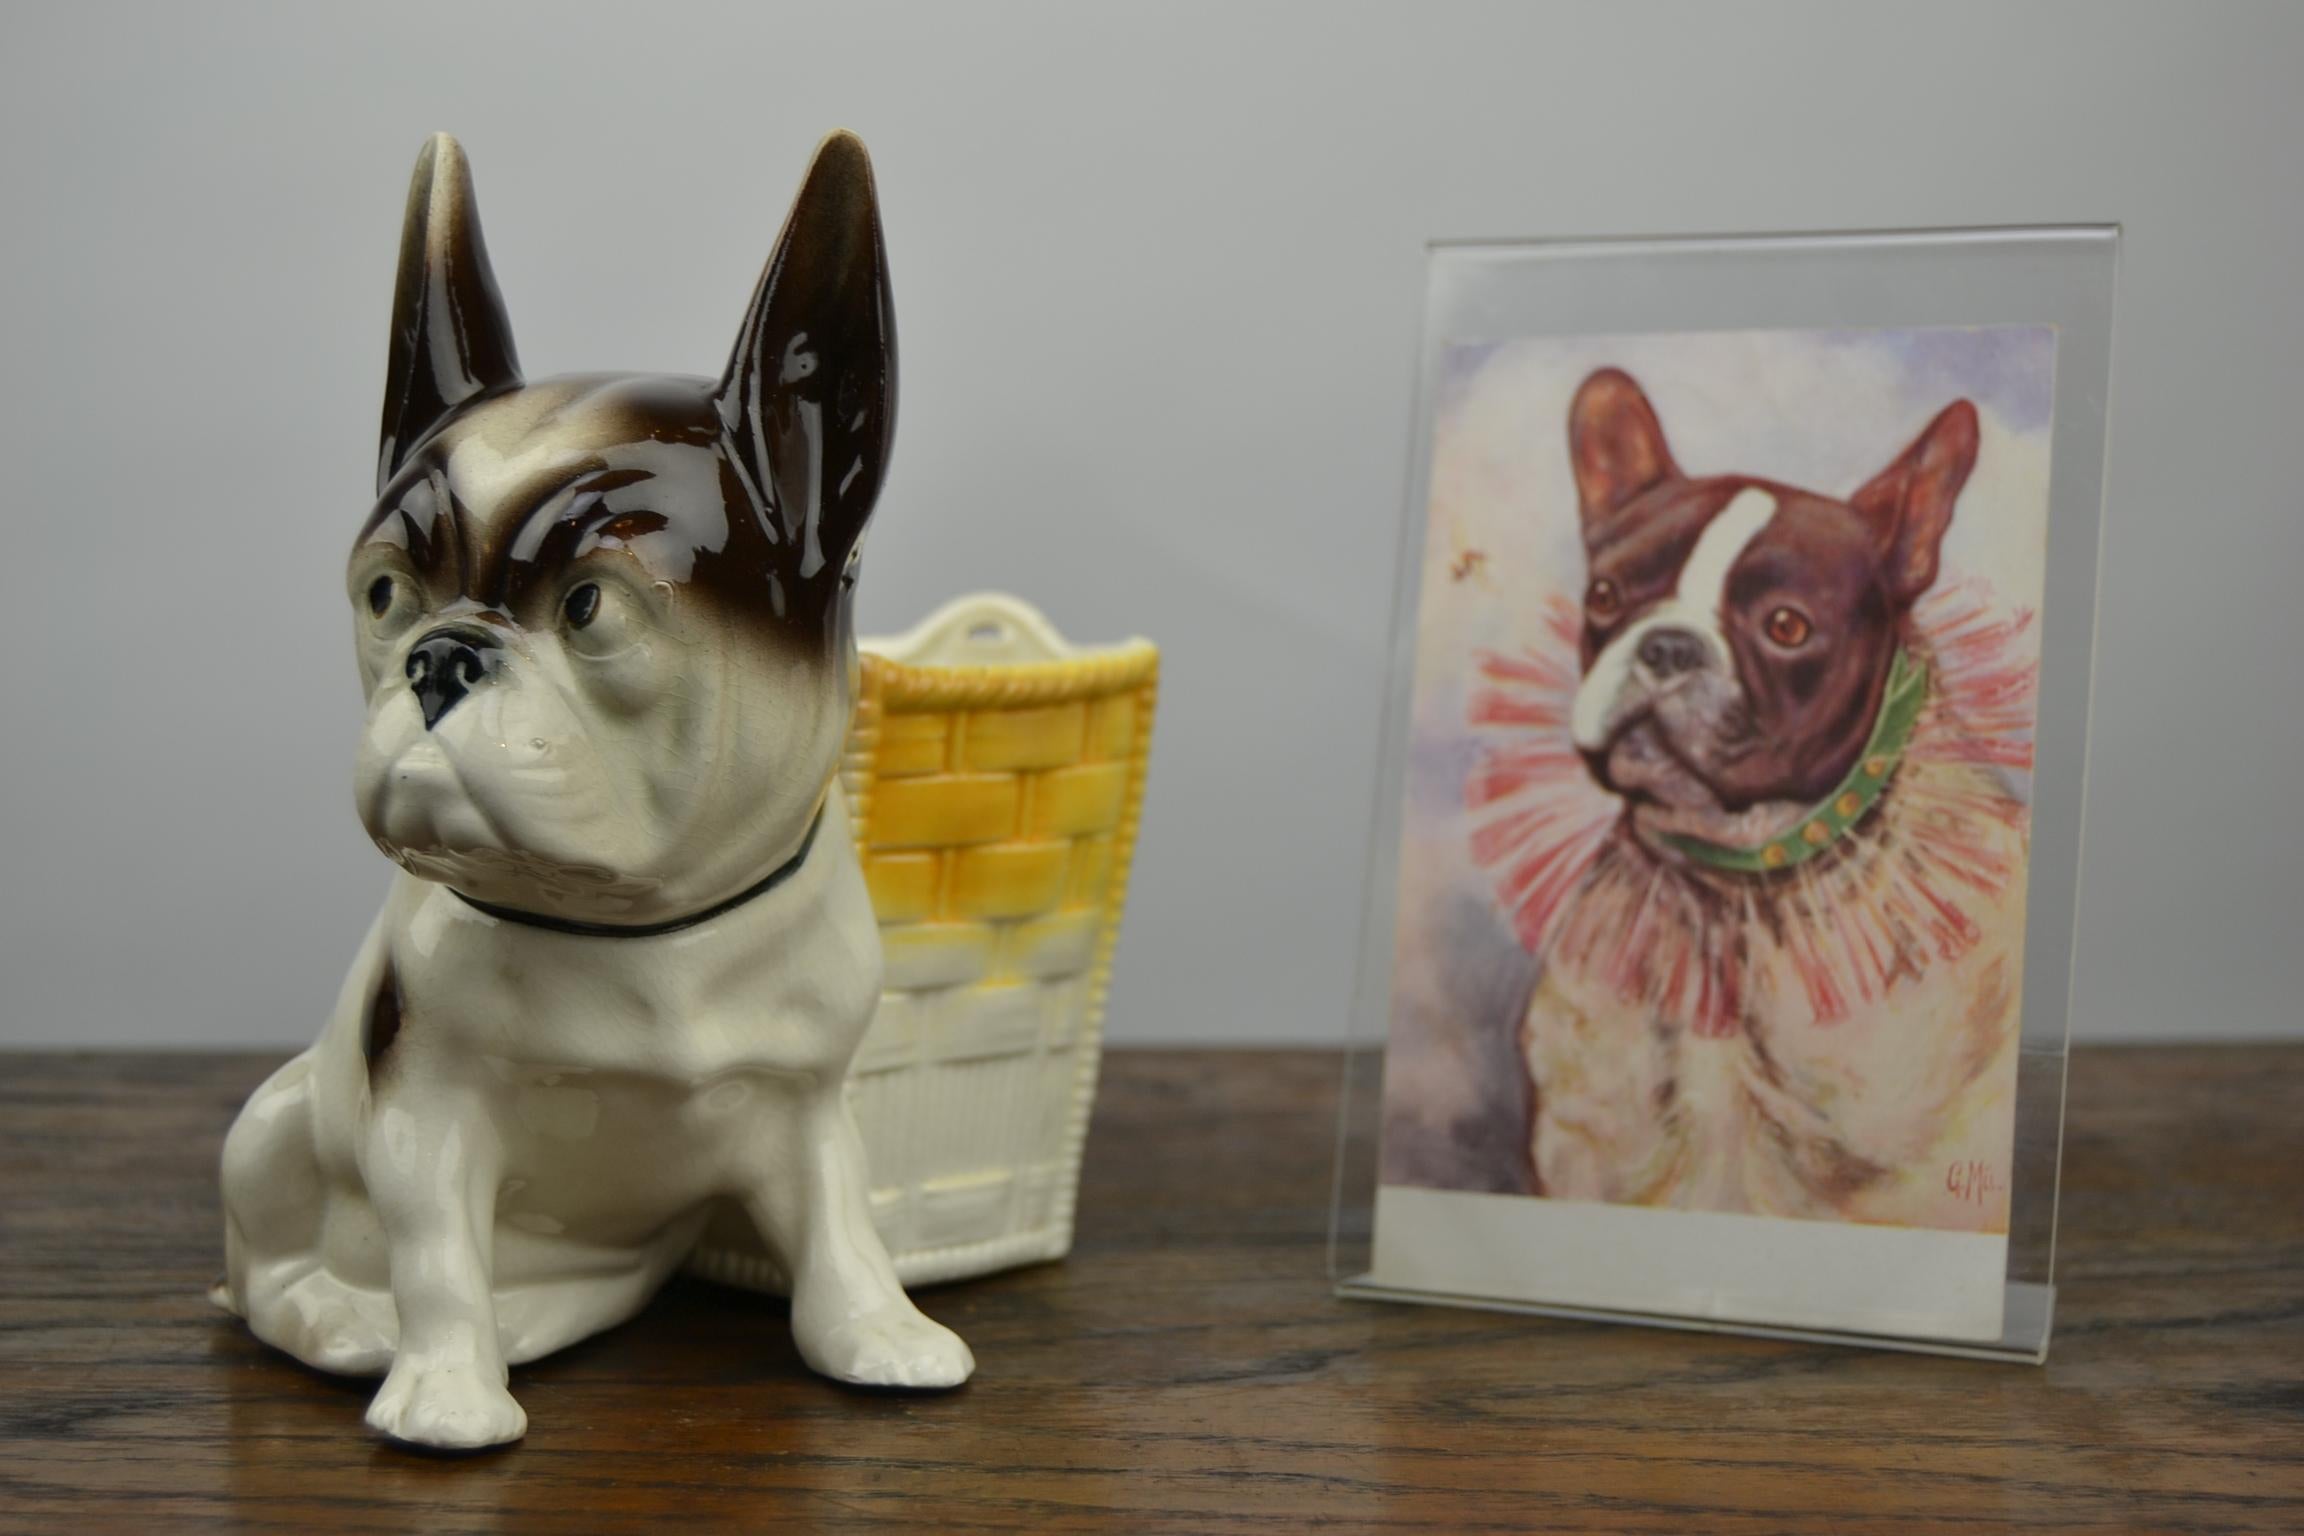 Art Deco porcelain French bulldog figurine - bulldog statue - bulldog planter - bulldog with little storage jar.
This animal statue has a craquele patina and does have some imperfections, but he's very charming and cute.
The dog figurine has a